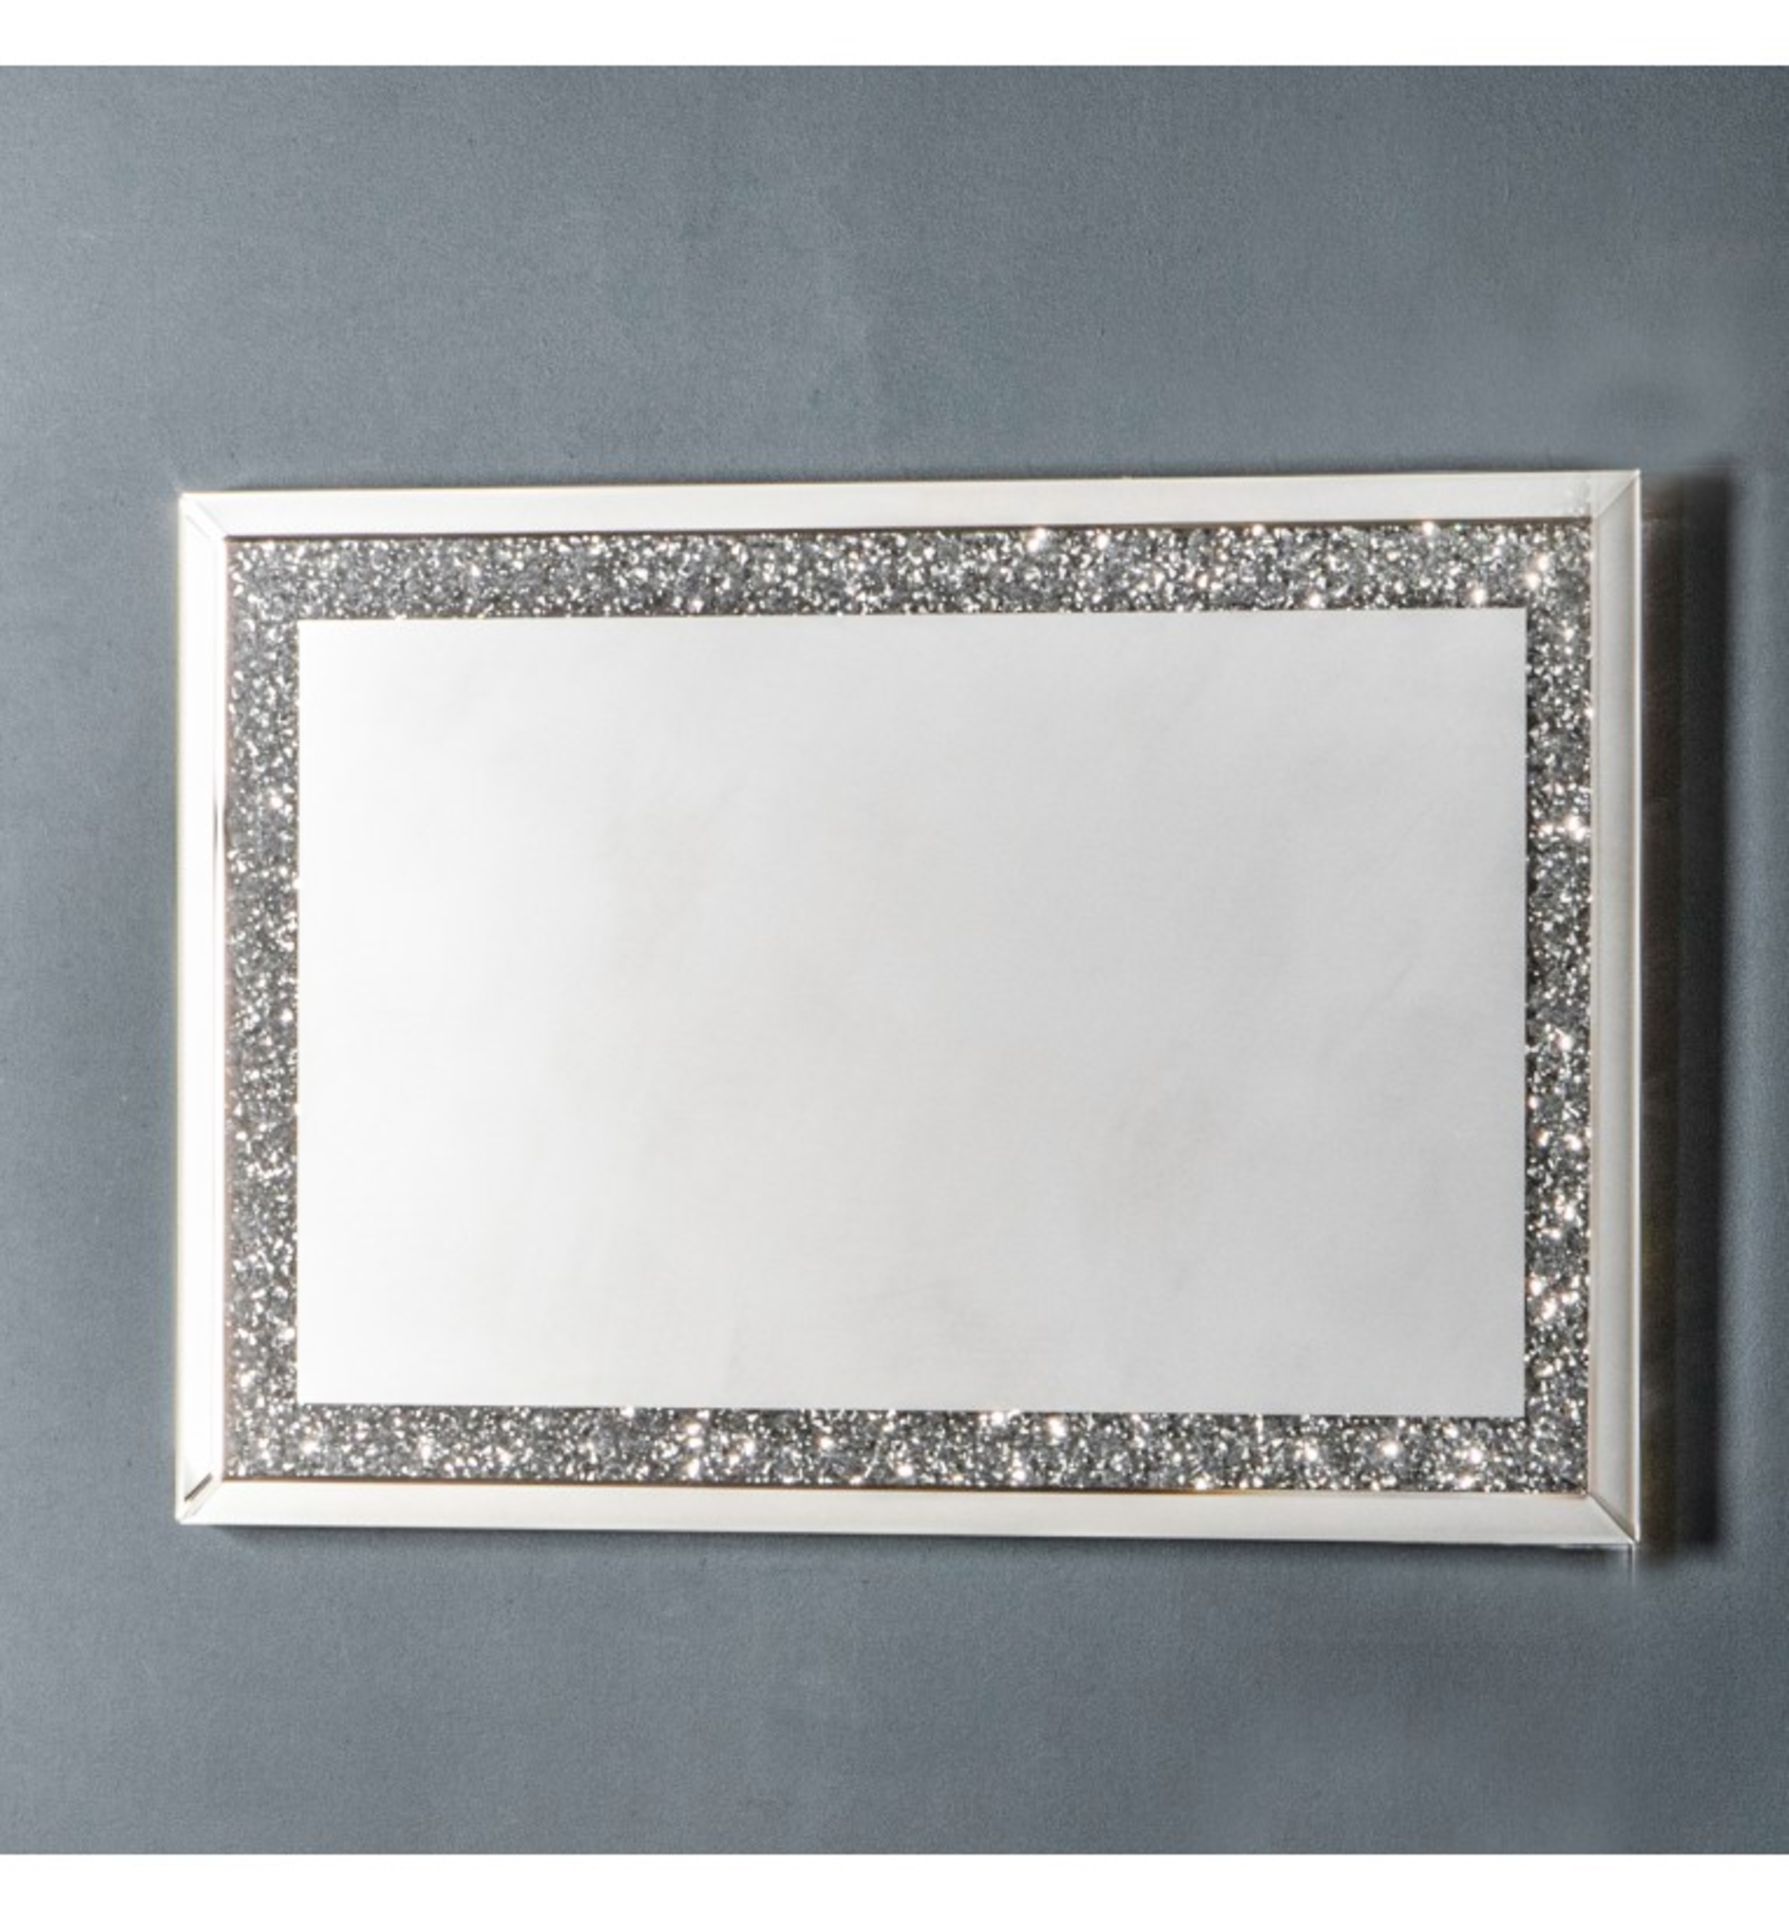 Westmoore Silver Mirror 600 x 900mm With A Thick Silver Glitter Framing This Mirror Is A Full Of